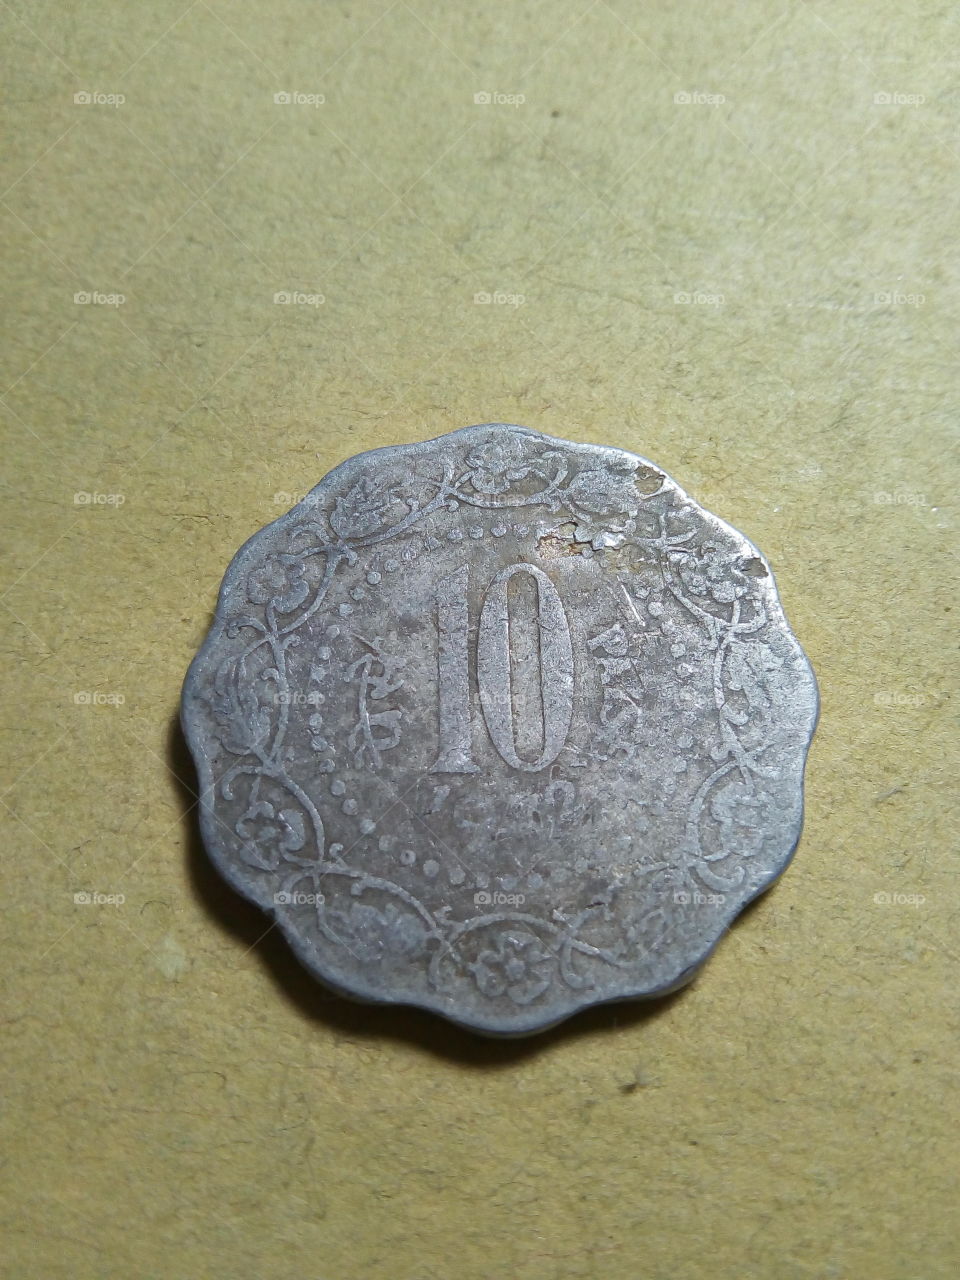 A coin of ten paise- 1/10 share of Indian Rupee issued by Government of India in 1972.